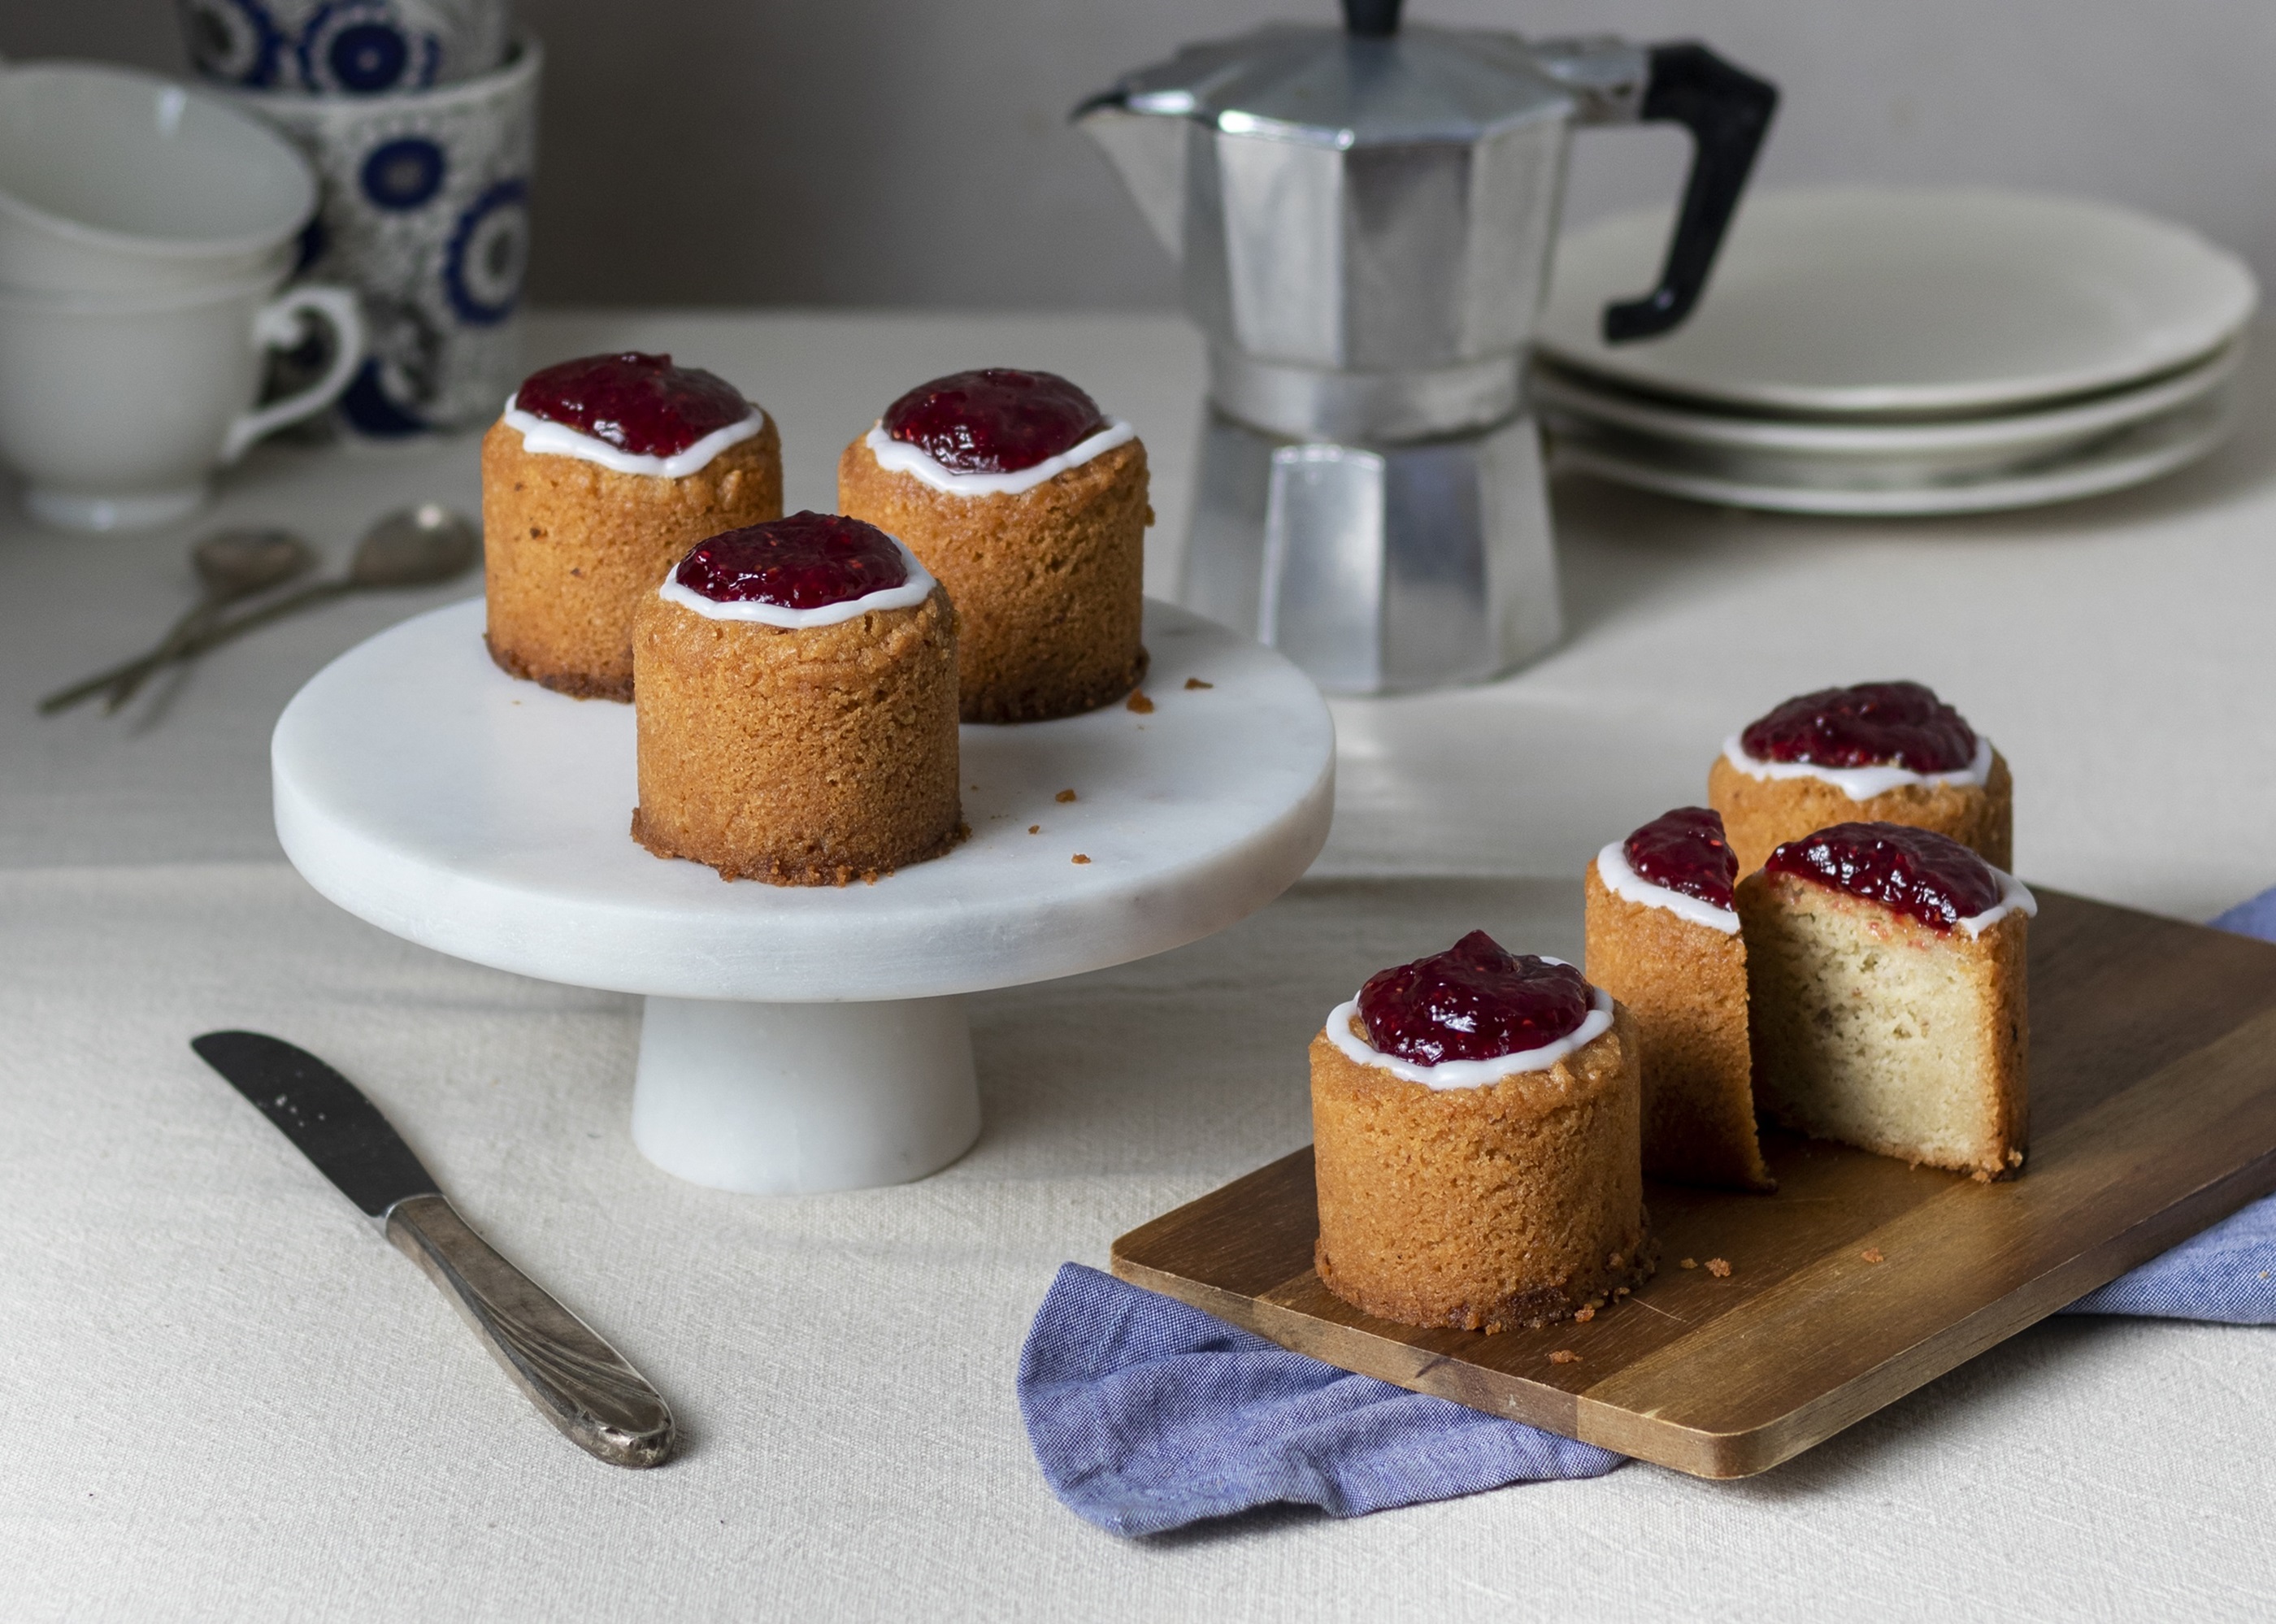 Record sales for bitter almond flavor - Runeberg Day in Finland